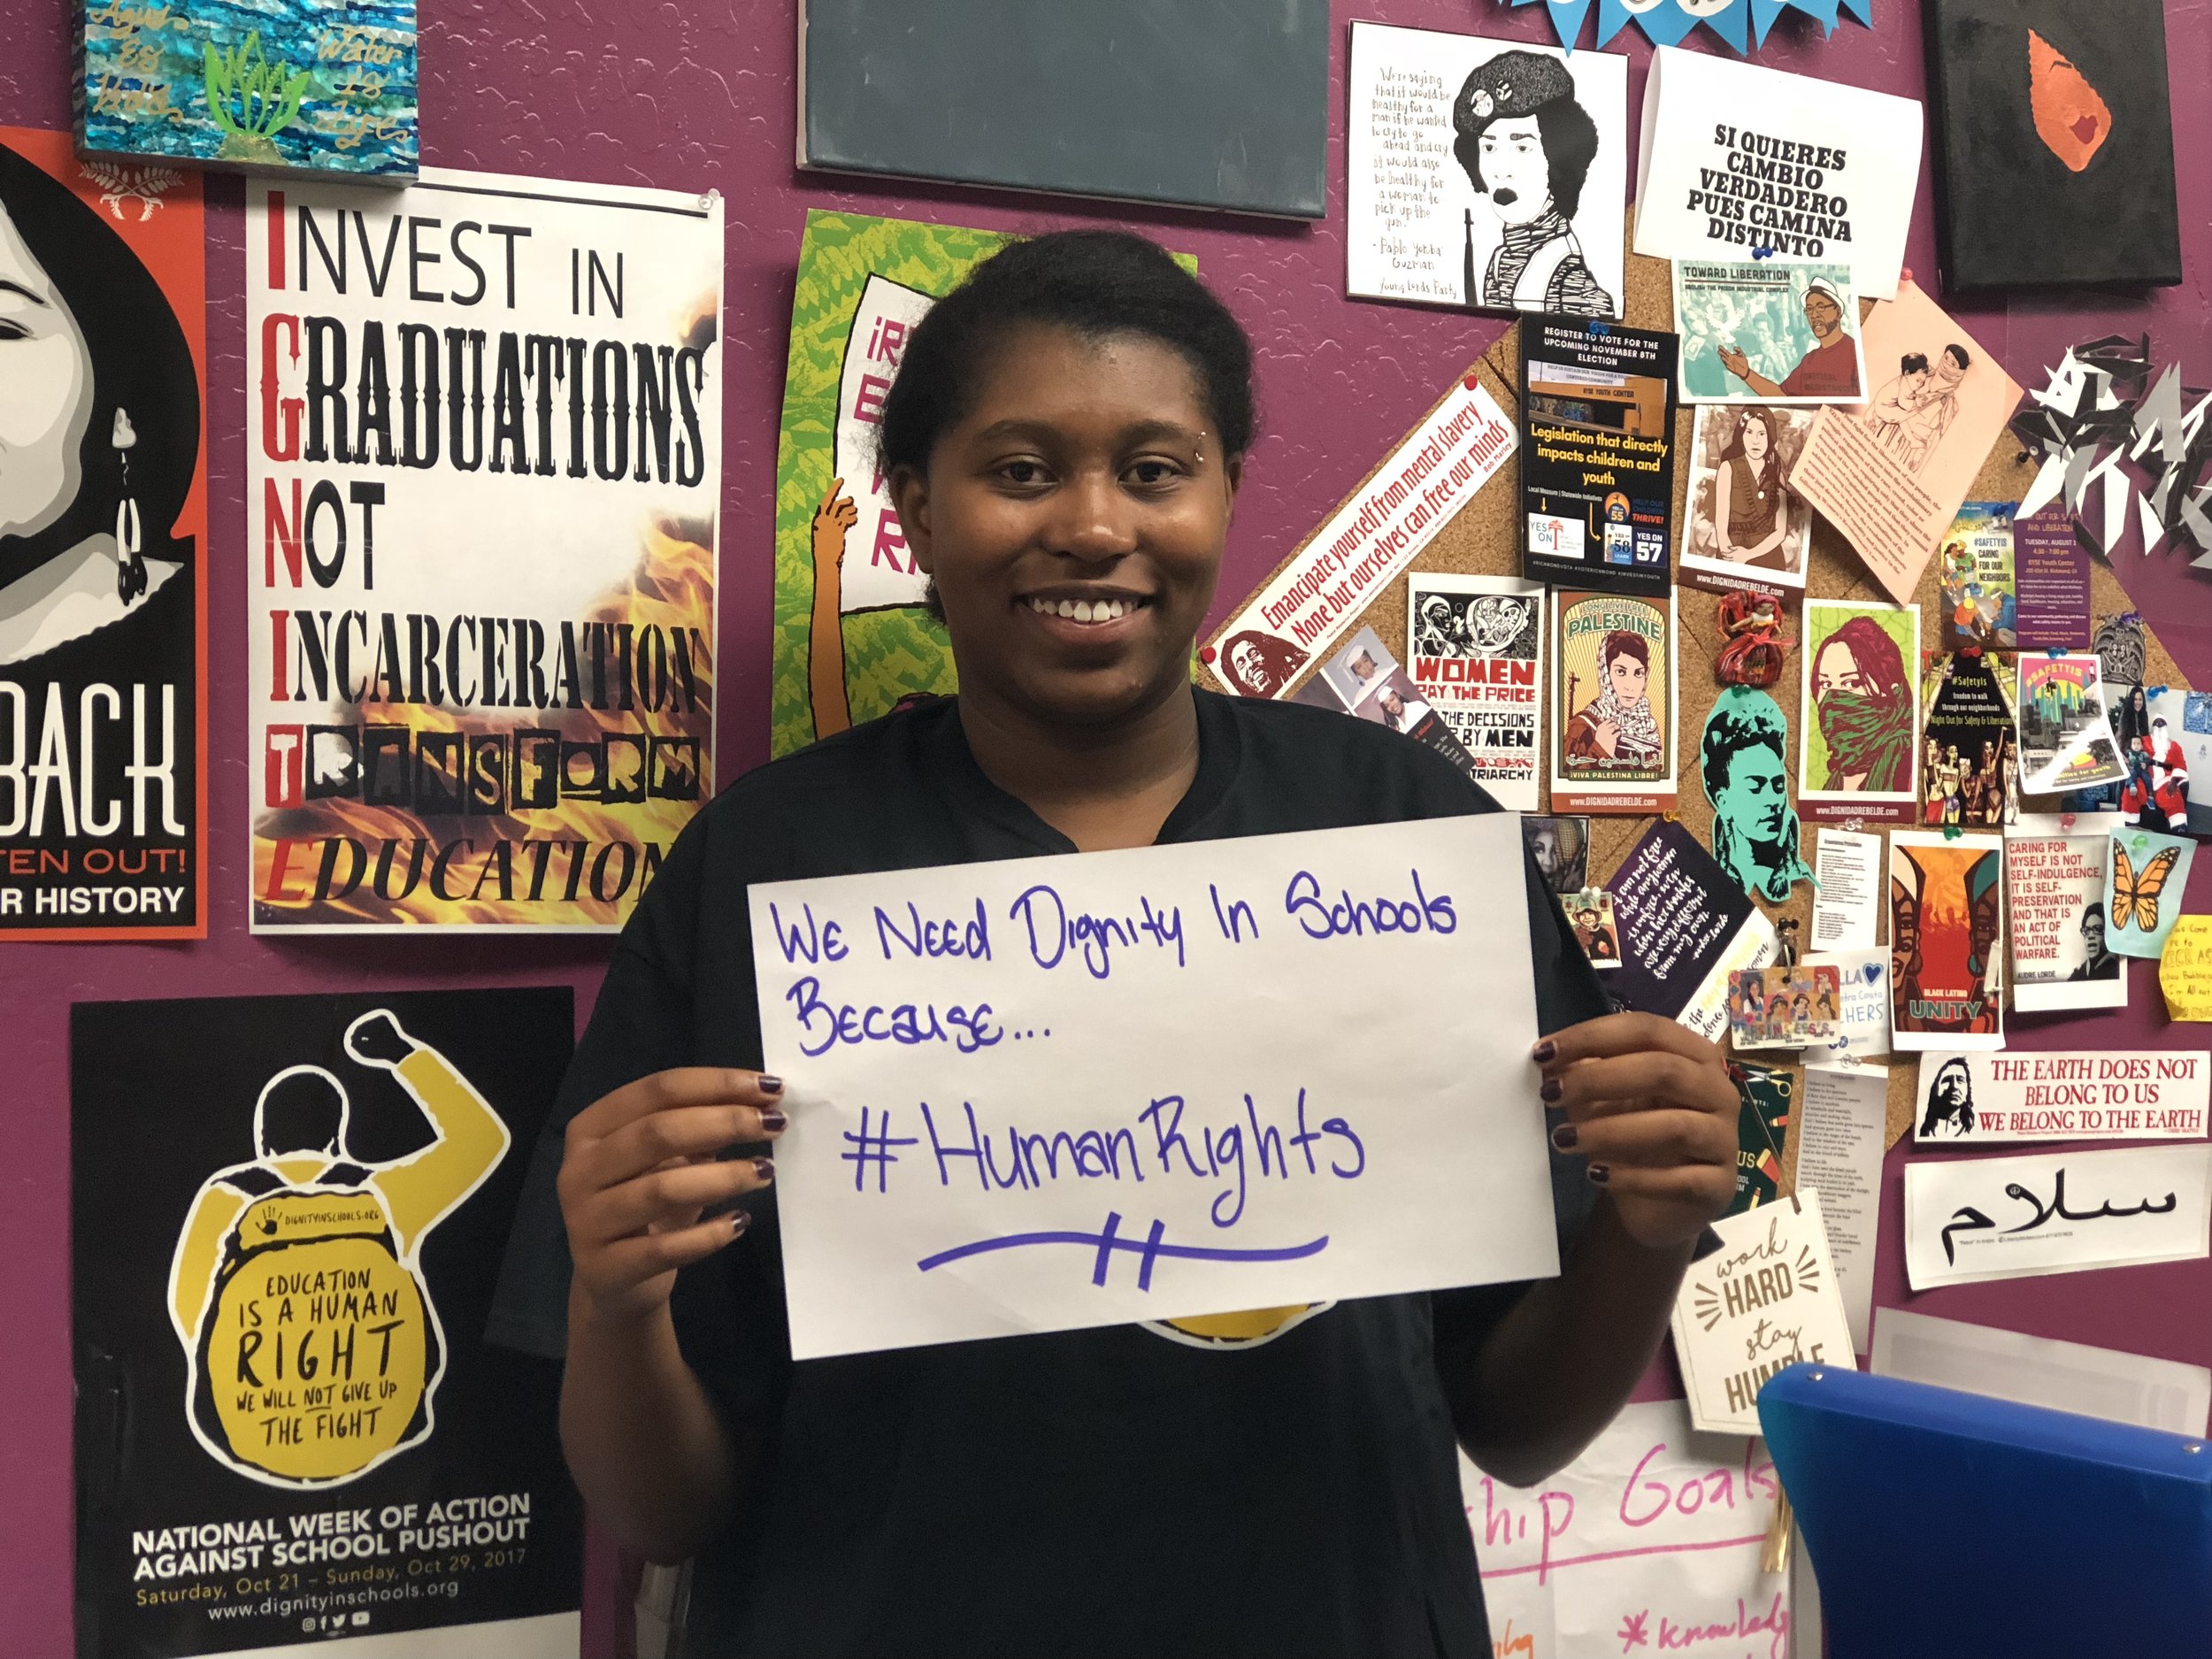 Dignity in Schools: National Week of Action 10/21-29